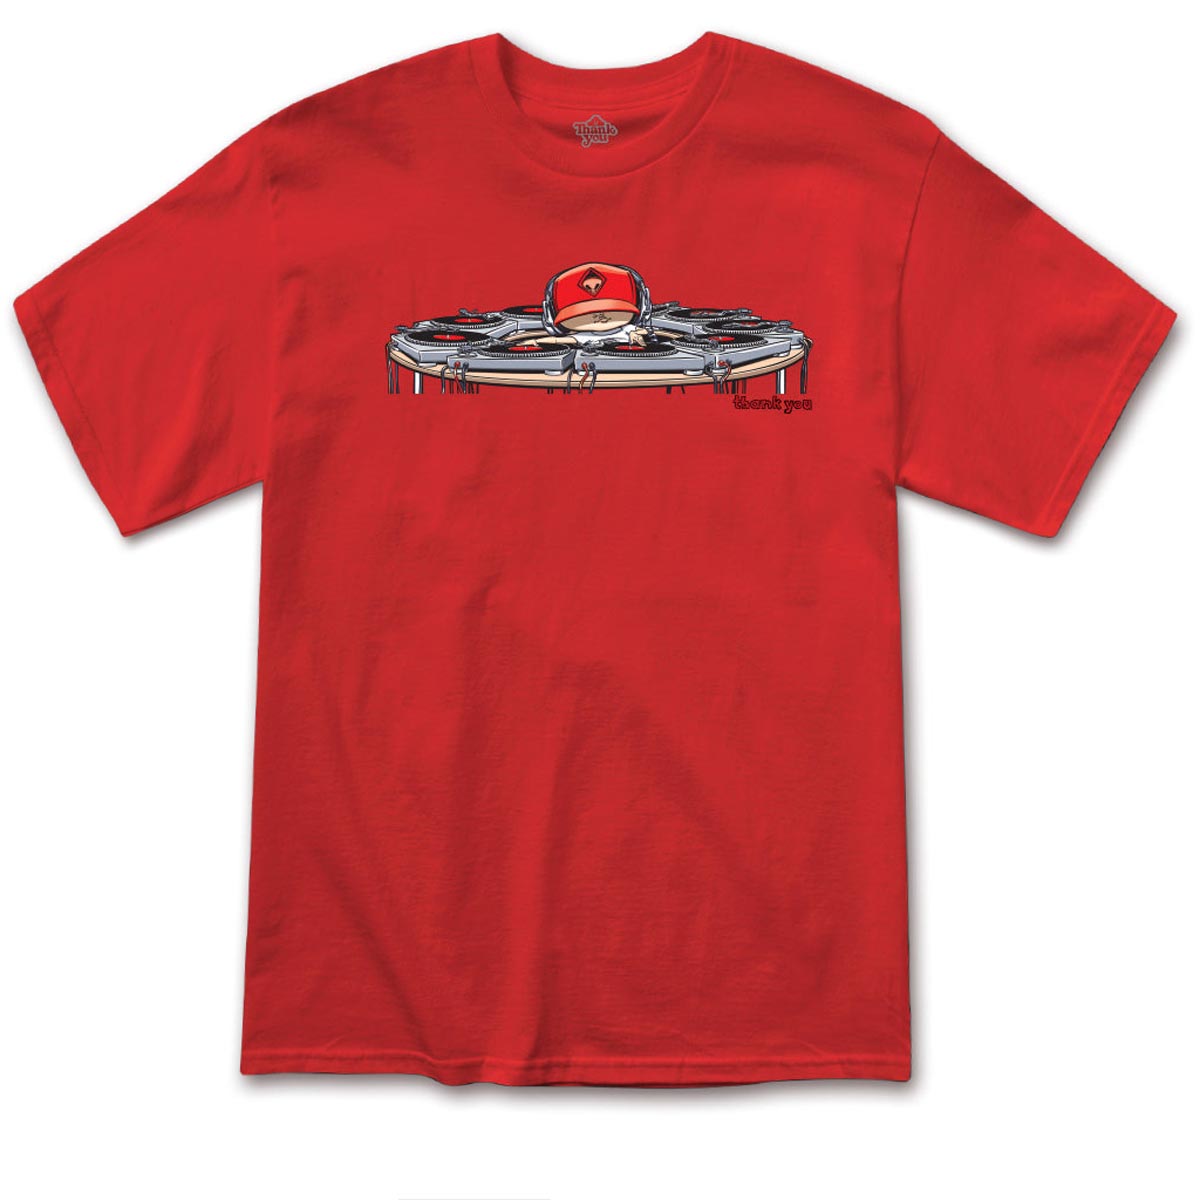 Thank You x Ronnie Creager Mix Master T-Shirt - Red image 1